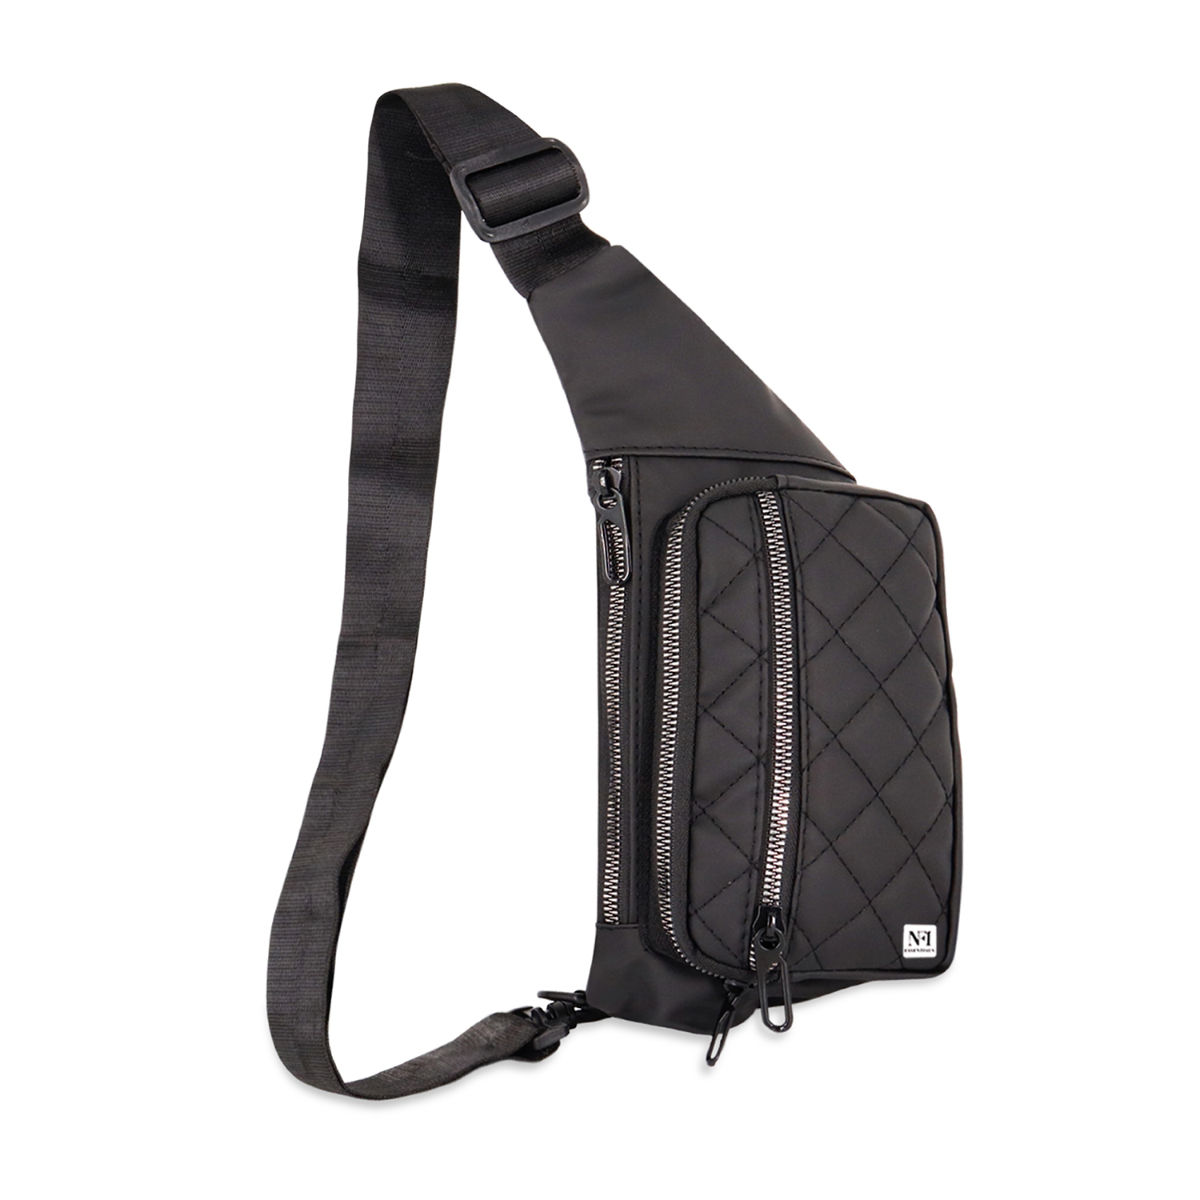 Buy LIFE TODAY Sling Bag for Men and WomenDouble Compartment Cross Body  Pouch Bag for Unisex Shoulder Sling Bags Online  Get 50 Off